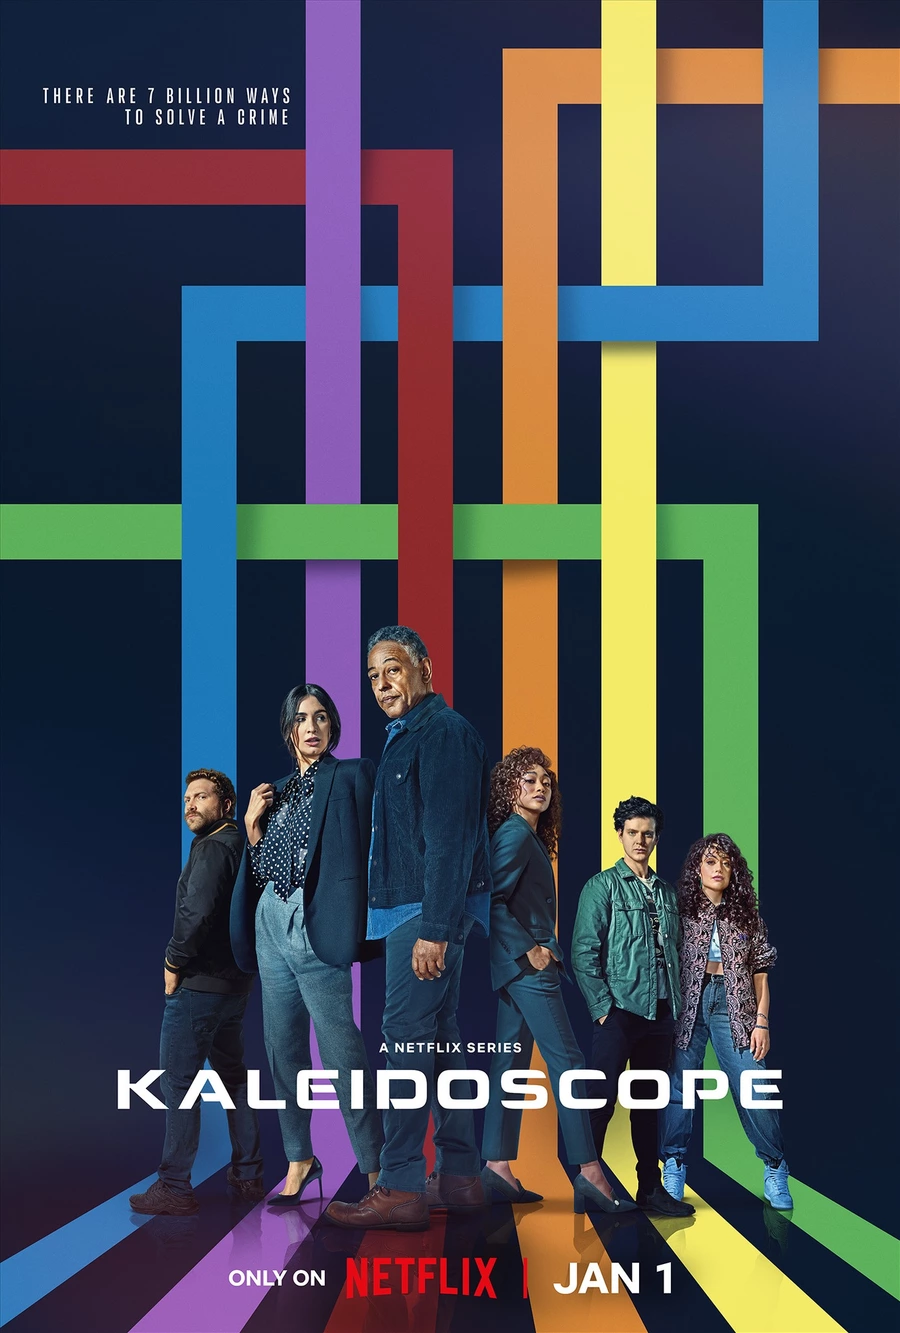 5664 poster for the mini series kaleidoscope which will be released on netflix on january 1